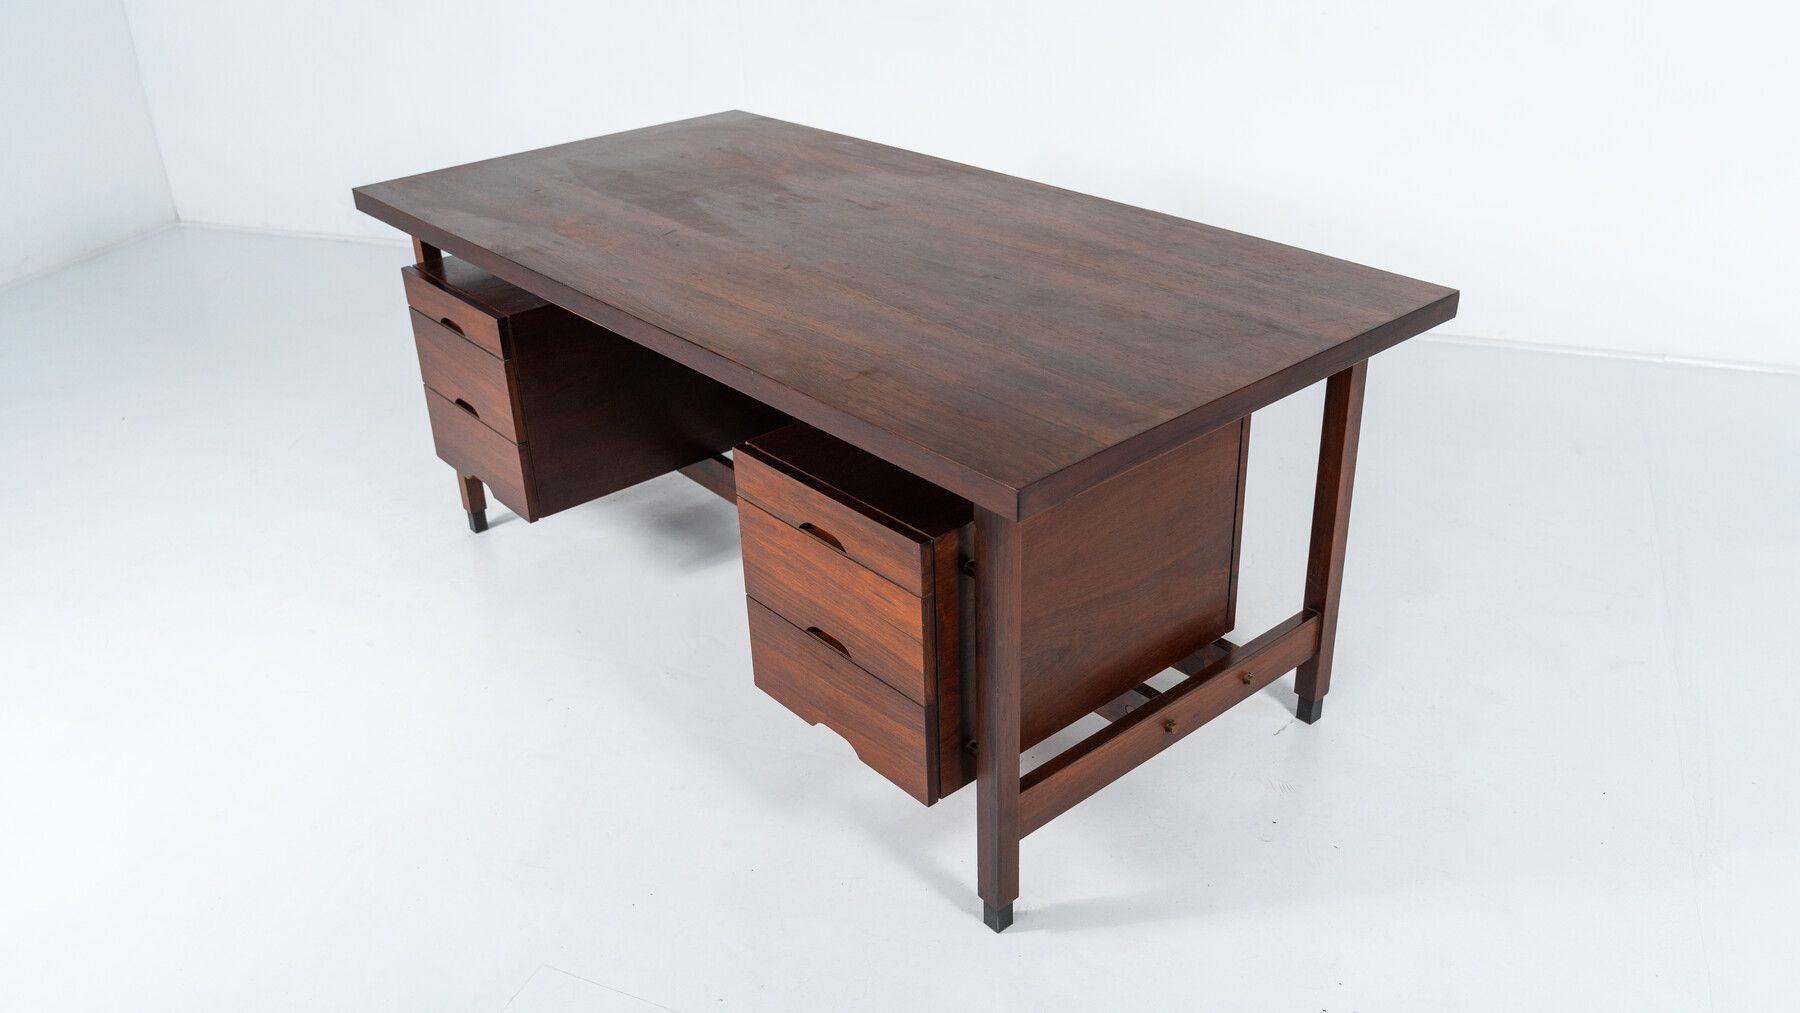 Mid-Century Modern Desk by Sergio Rodrigues, Brazil, 1960s